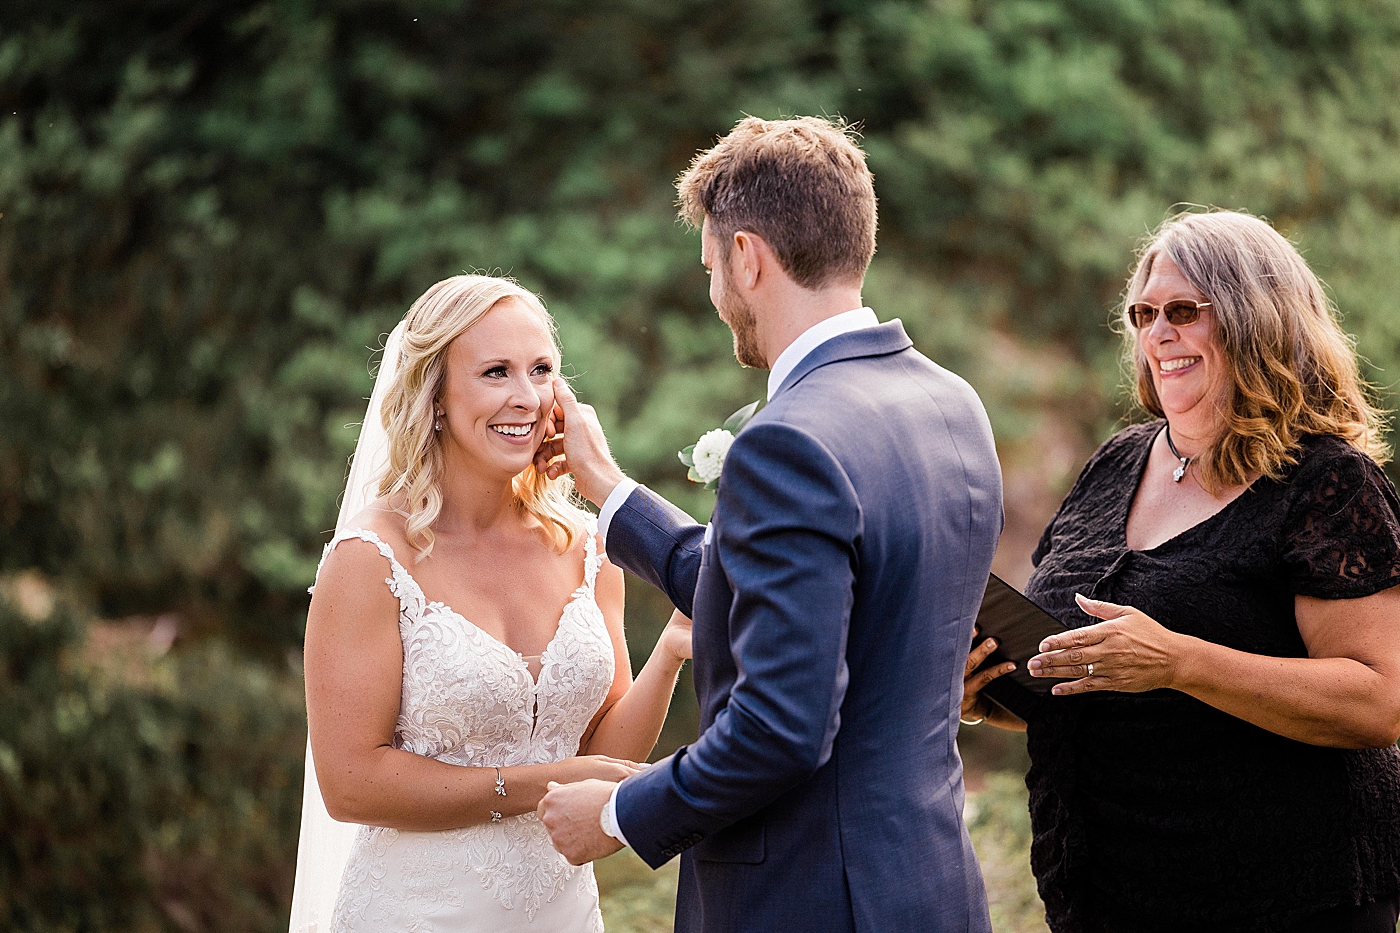 Groom wipes tear from bride during elopement ceremony at Mount Baker. Photo by Megan Montalvo Photography.